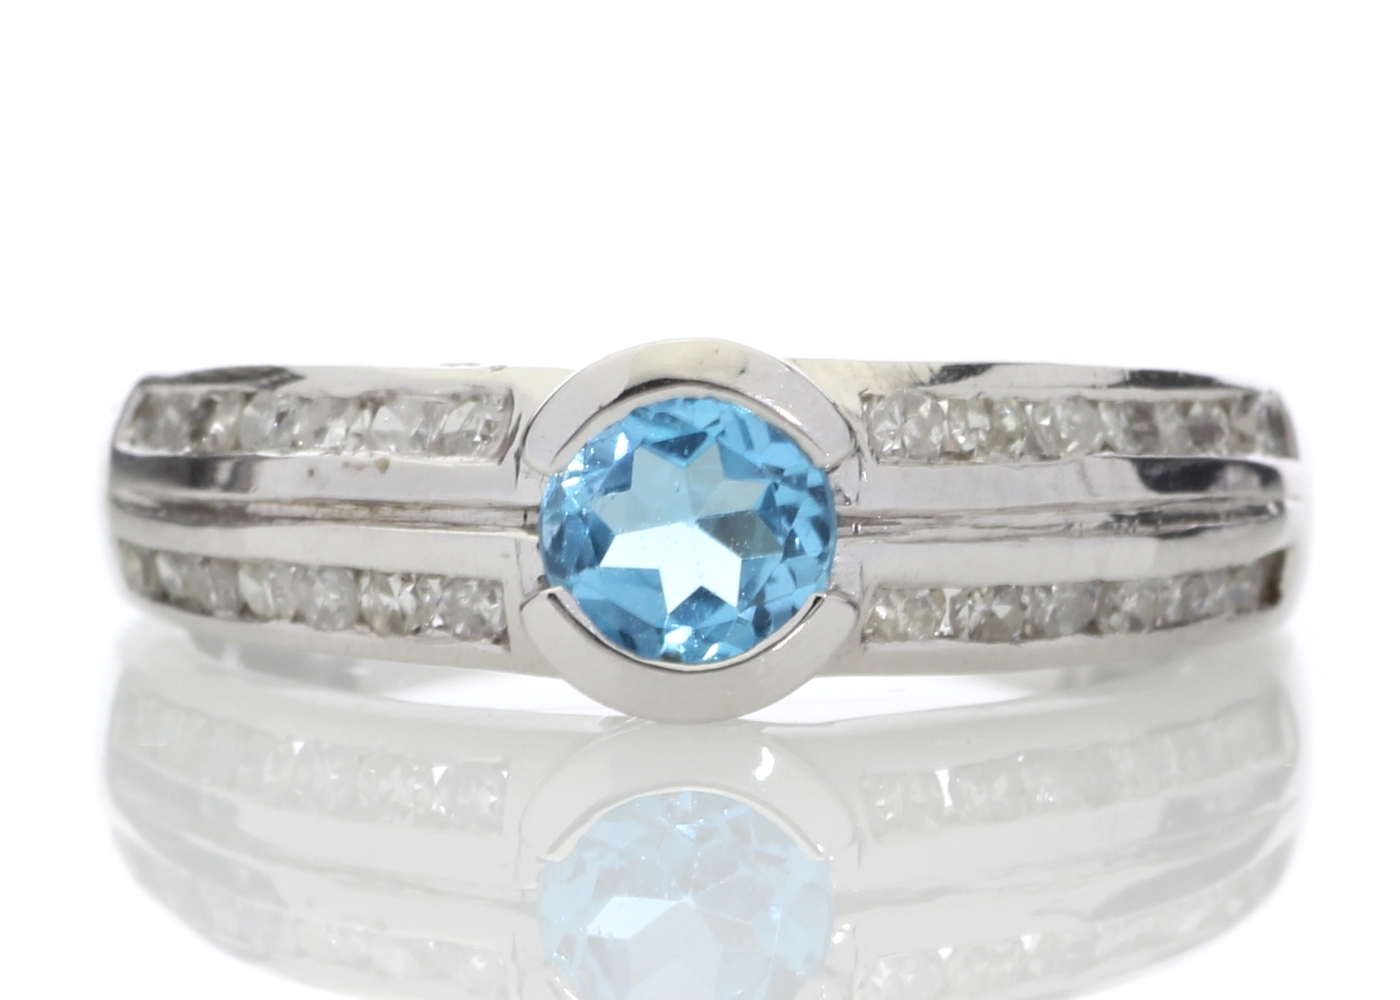 9k White Gold Double Channel Set Diamond and Blue Topaz Ring